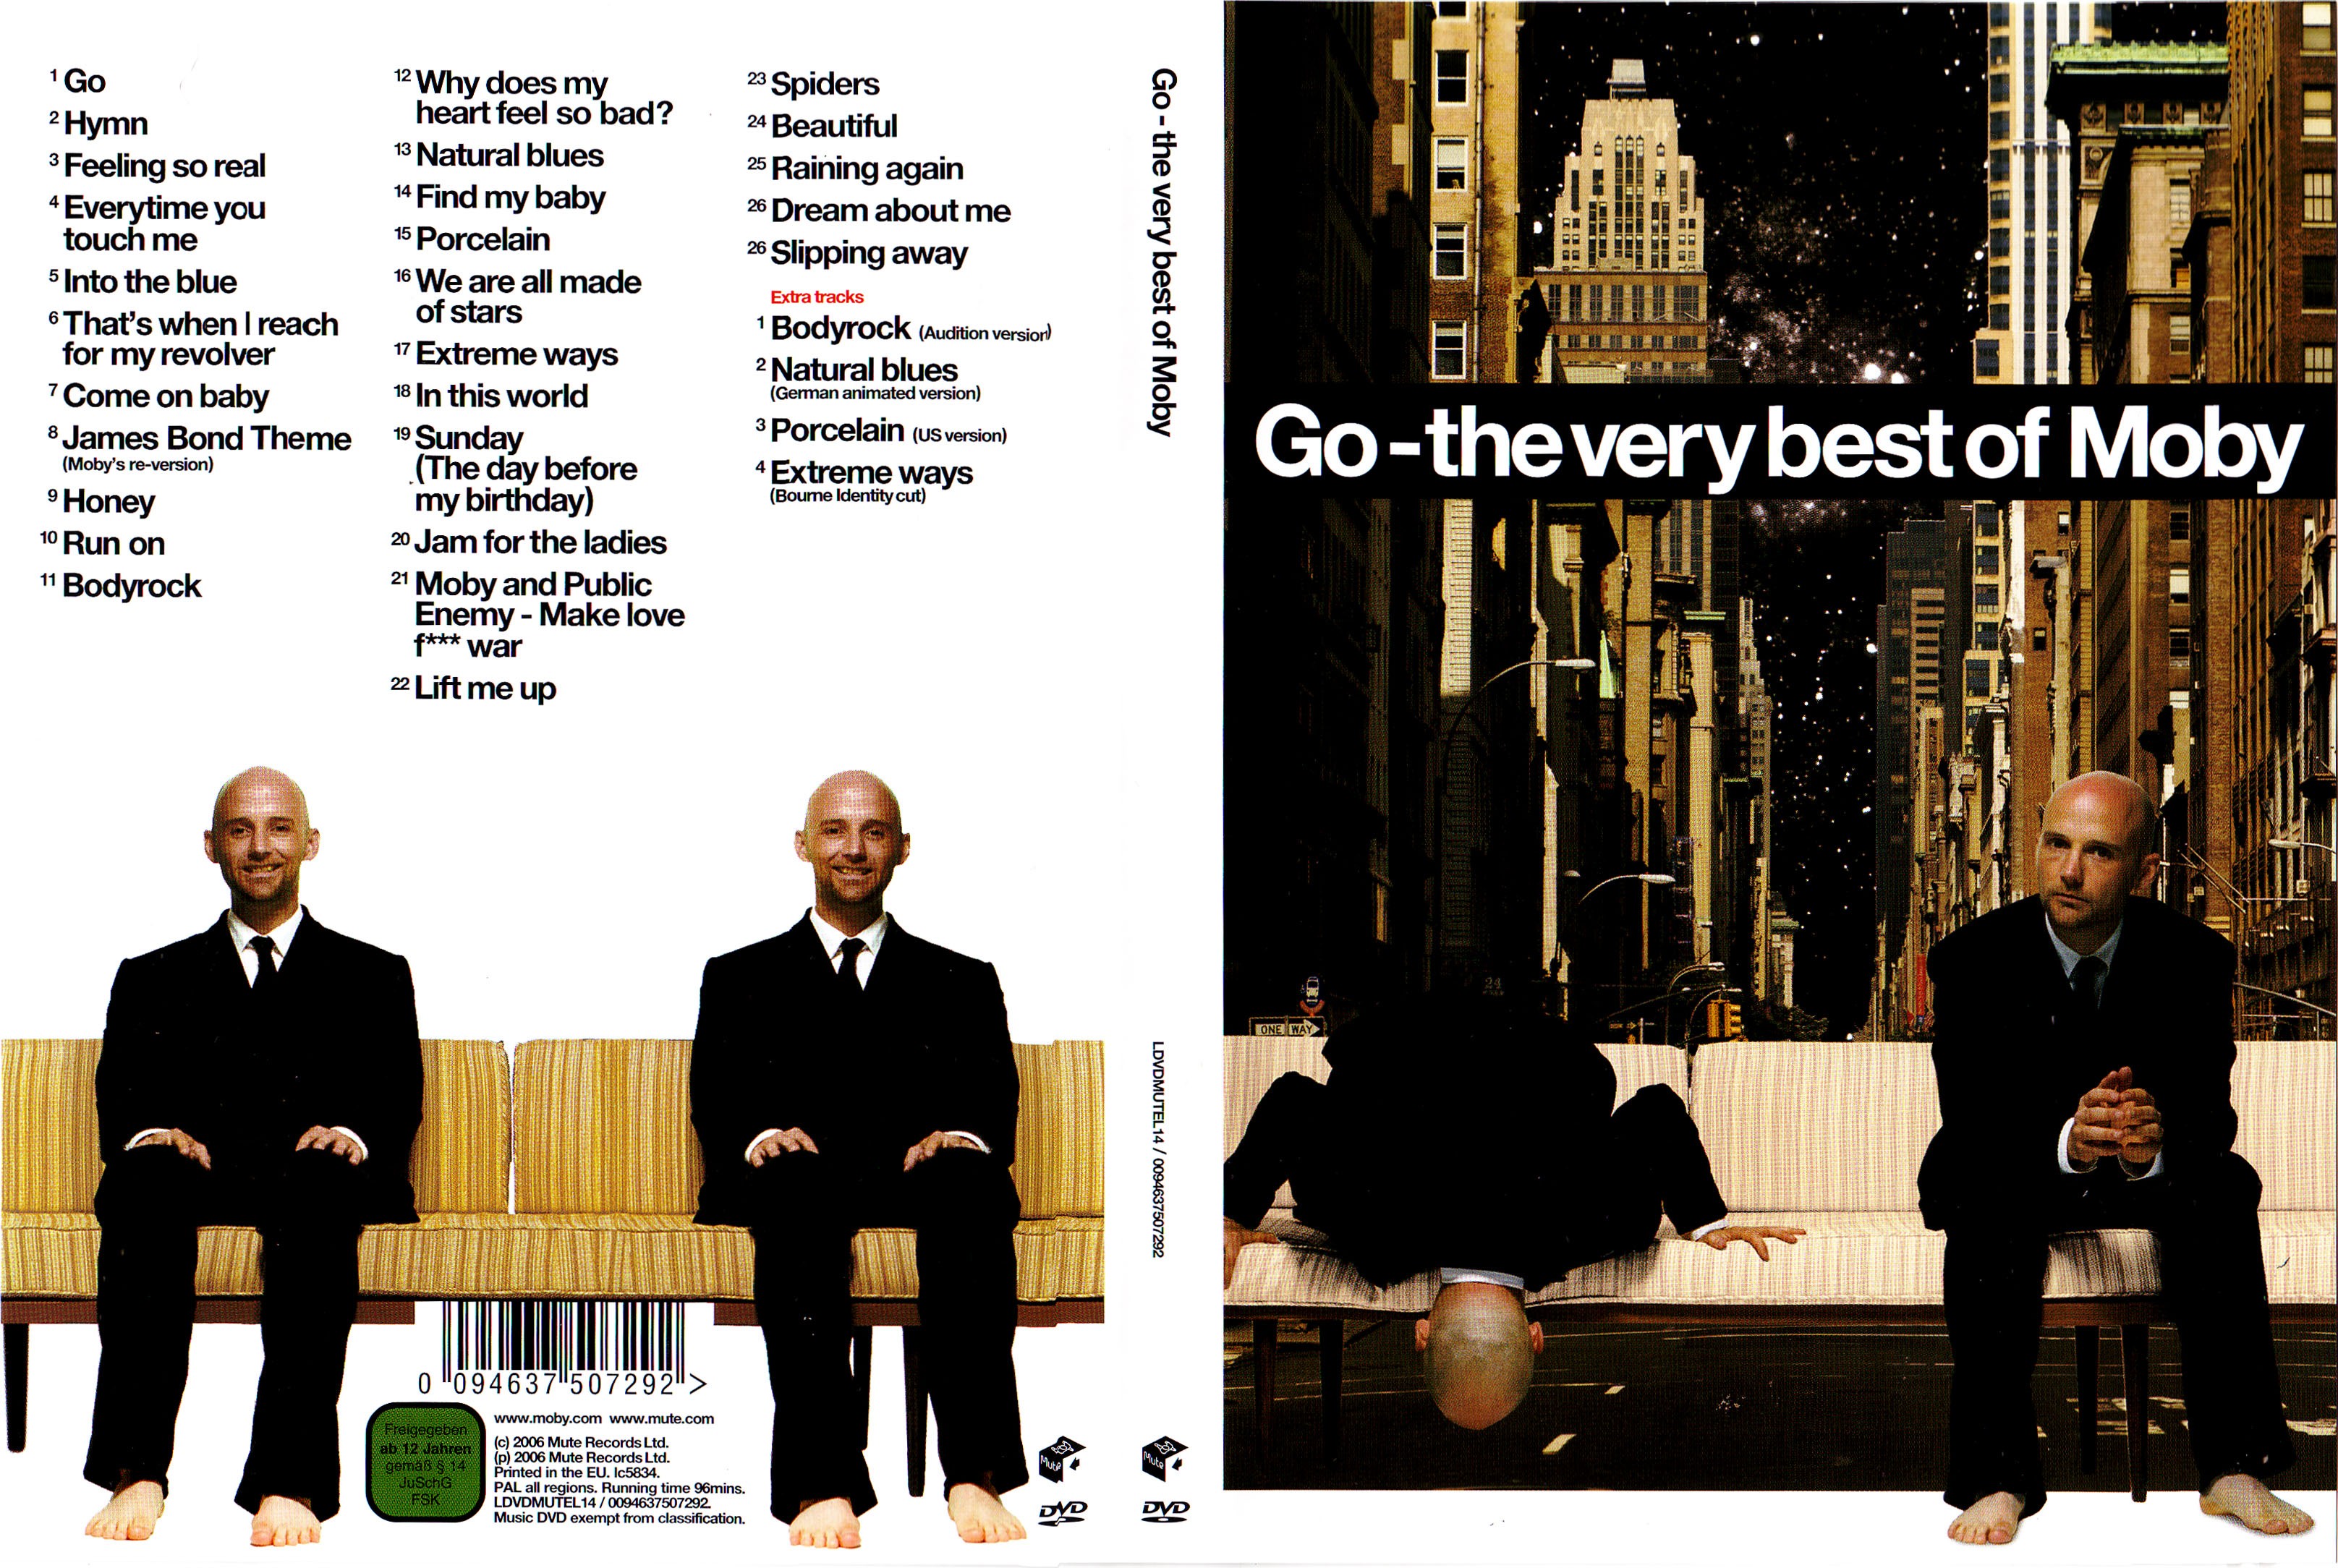 Jaquette DVD Moby Go the Very Best Of